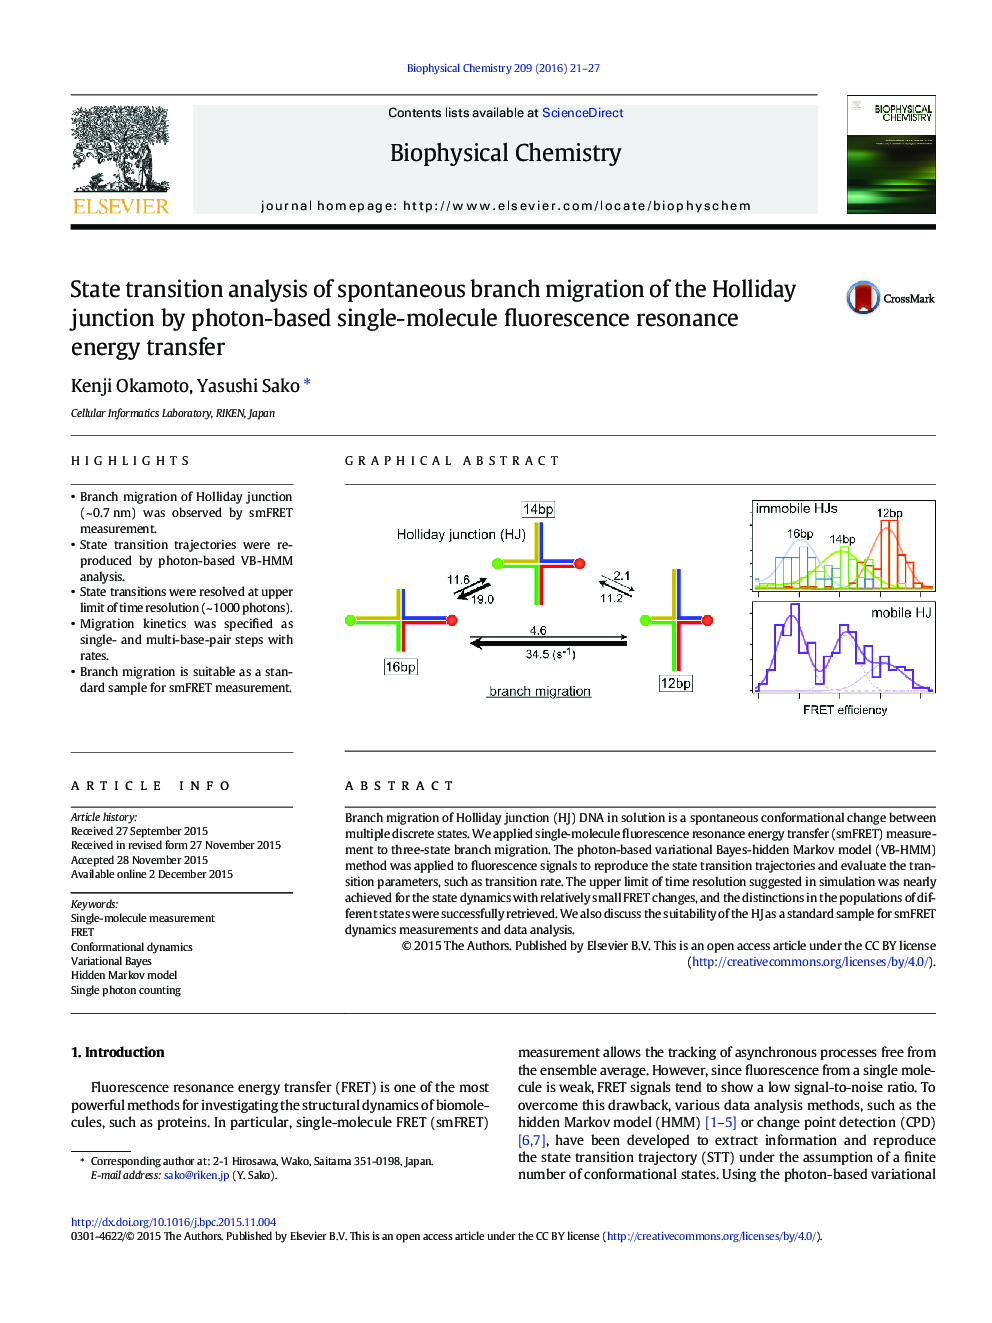 State transition analysis of spontaneous branch migration of the Holliday junction by photon-based single-molecule fluorescence resonance energy transfer